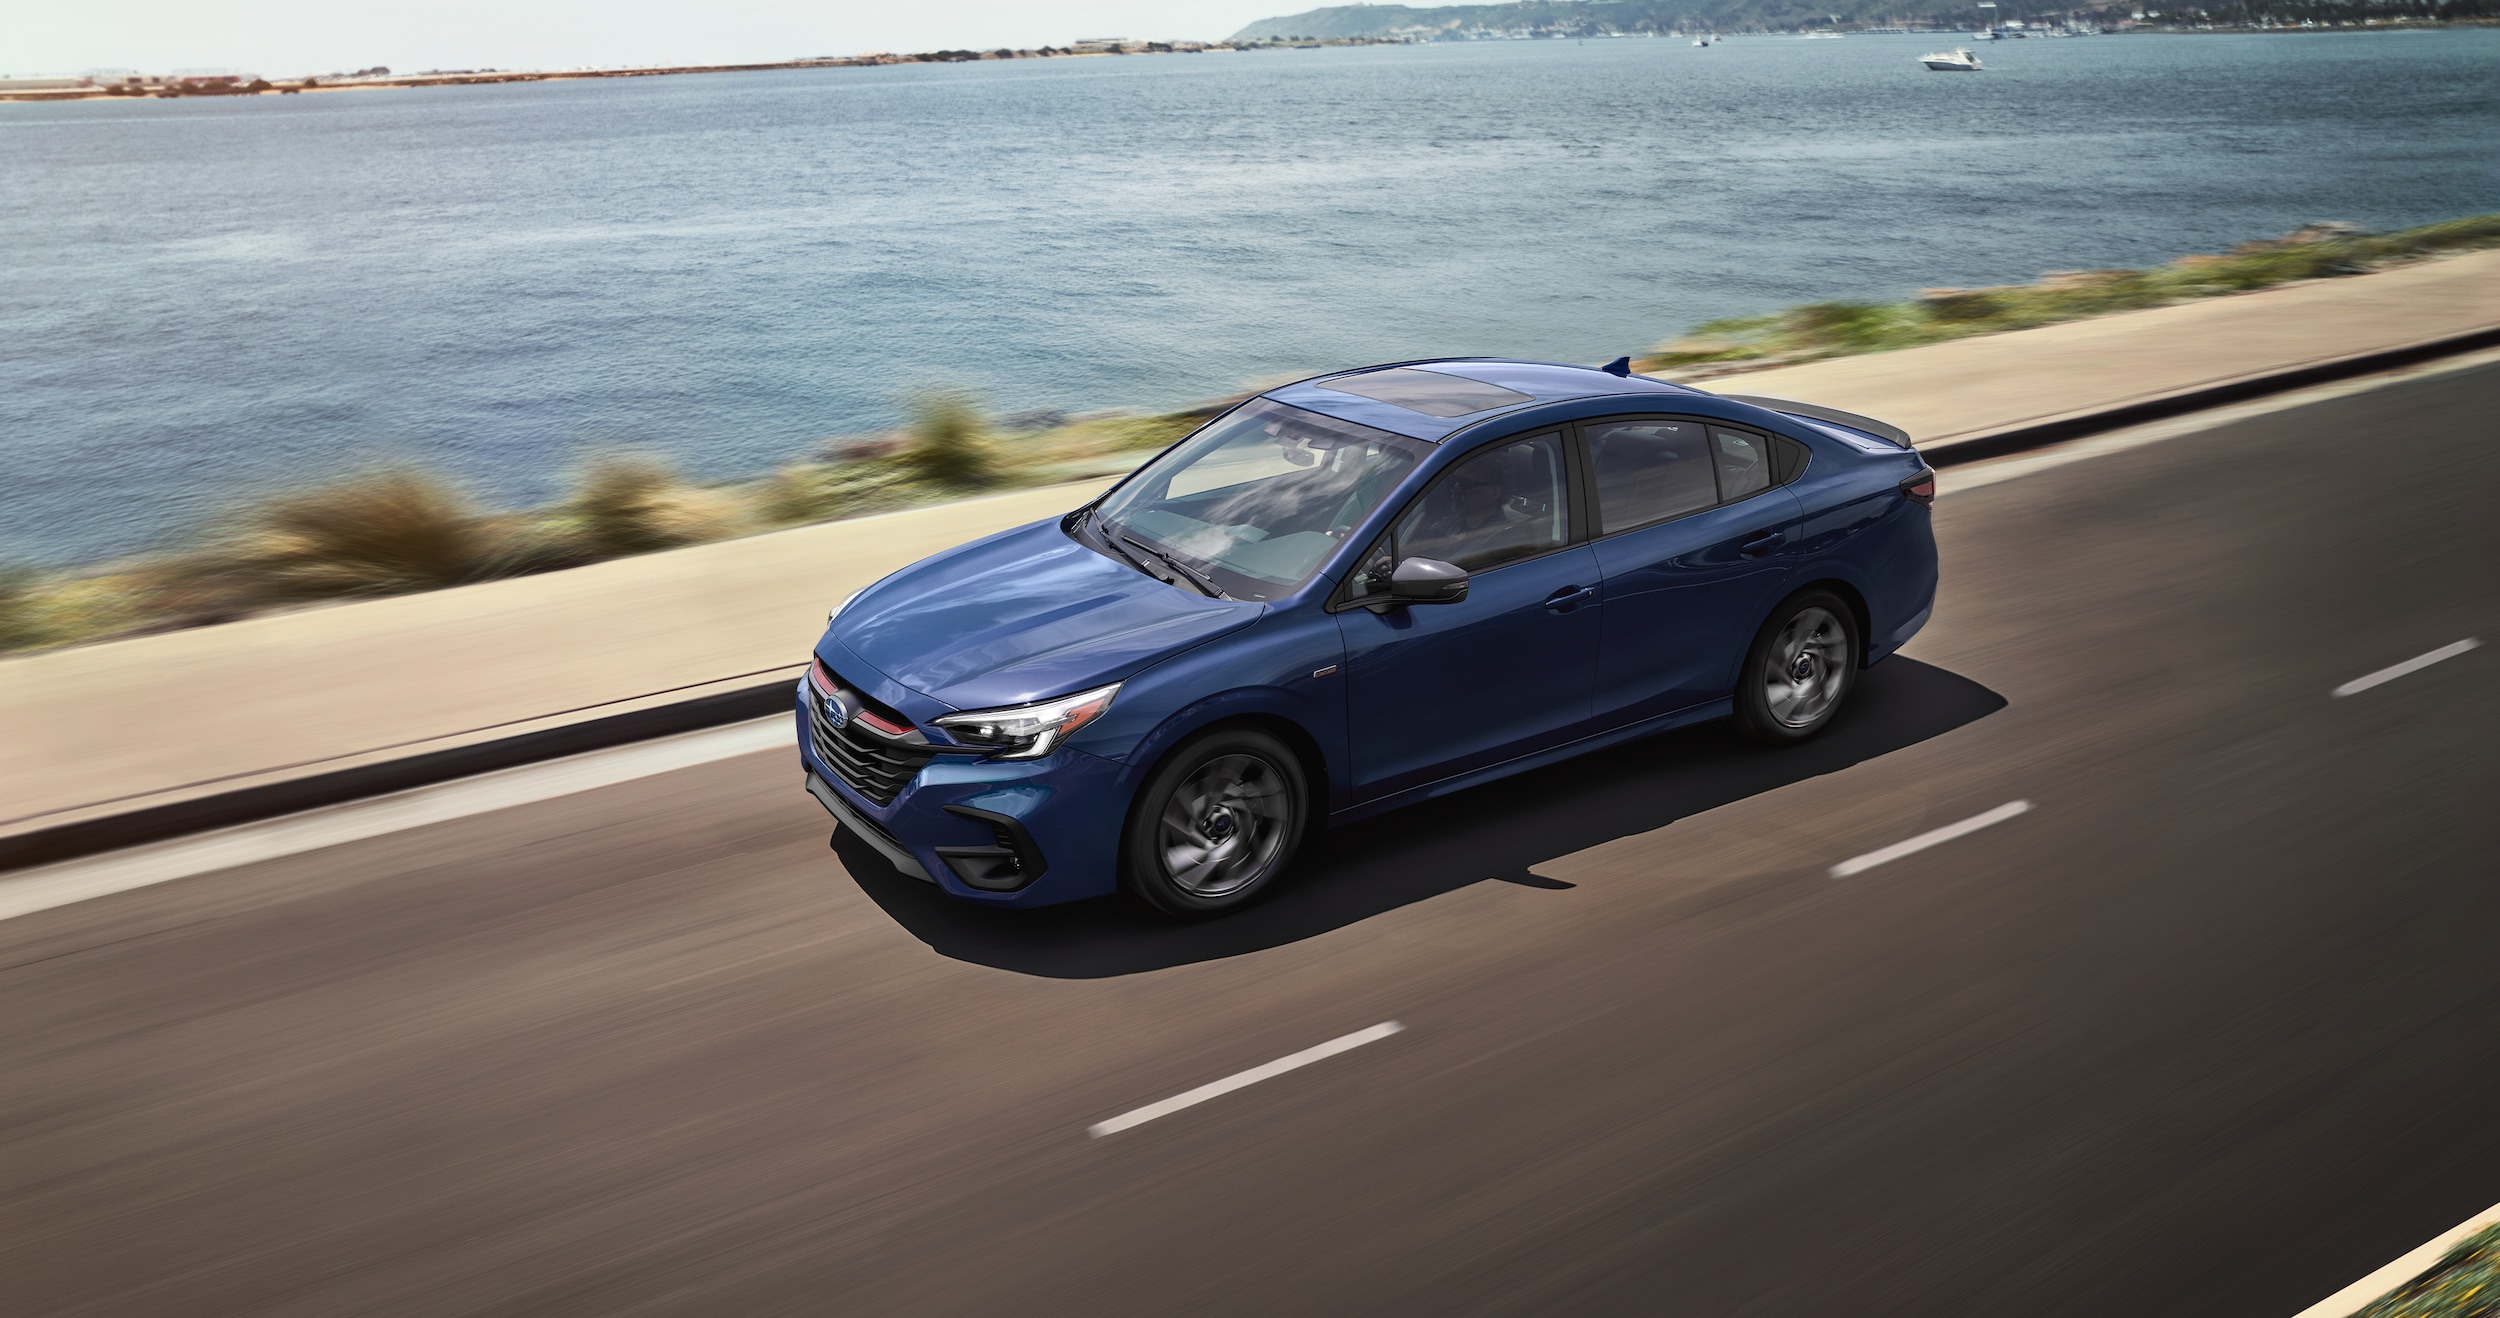 2024 Subaru Cars: What's New With the Impreza, Legacy, WRX, and BRZ